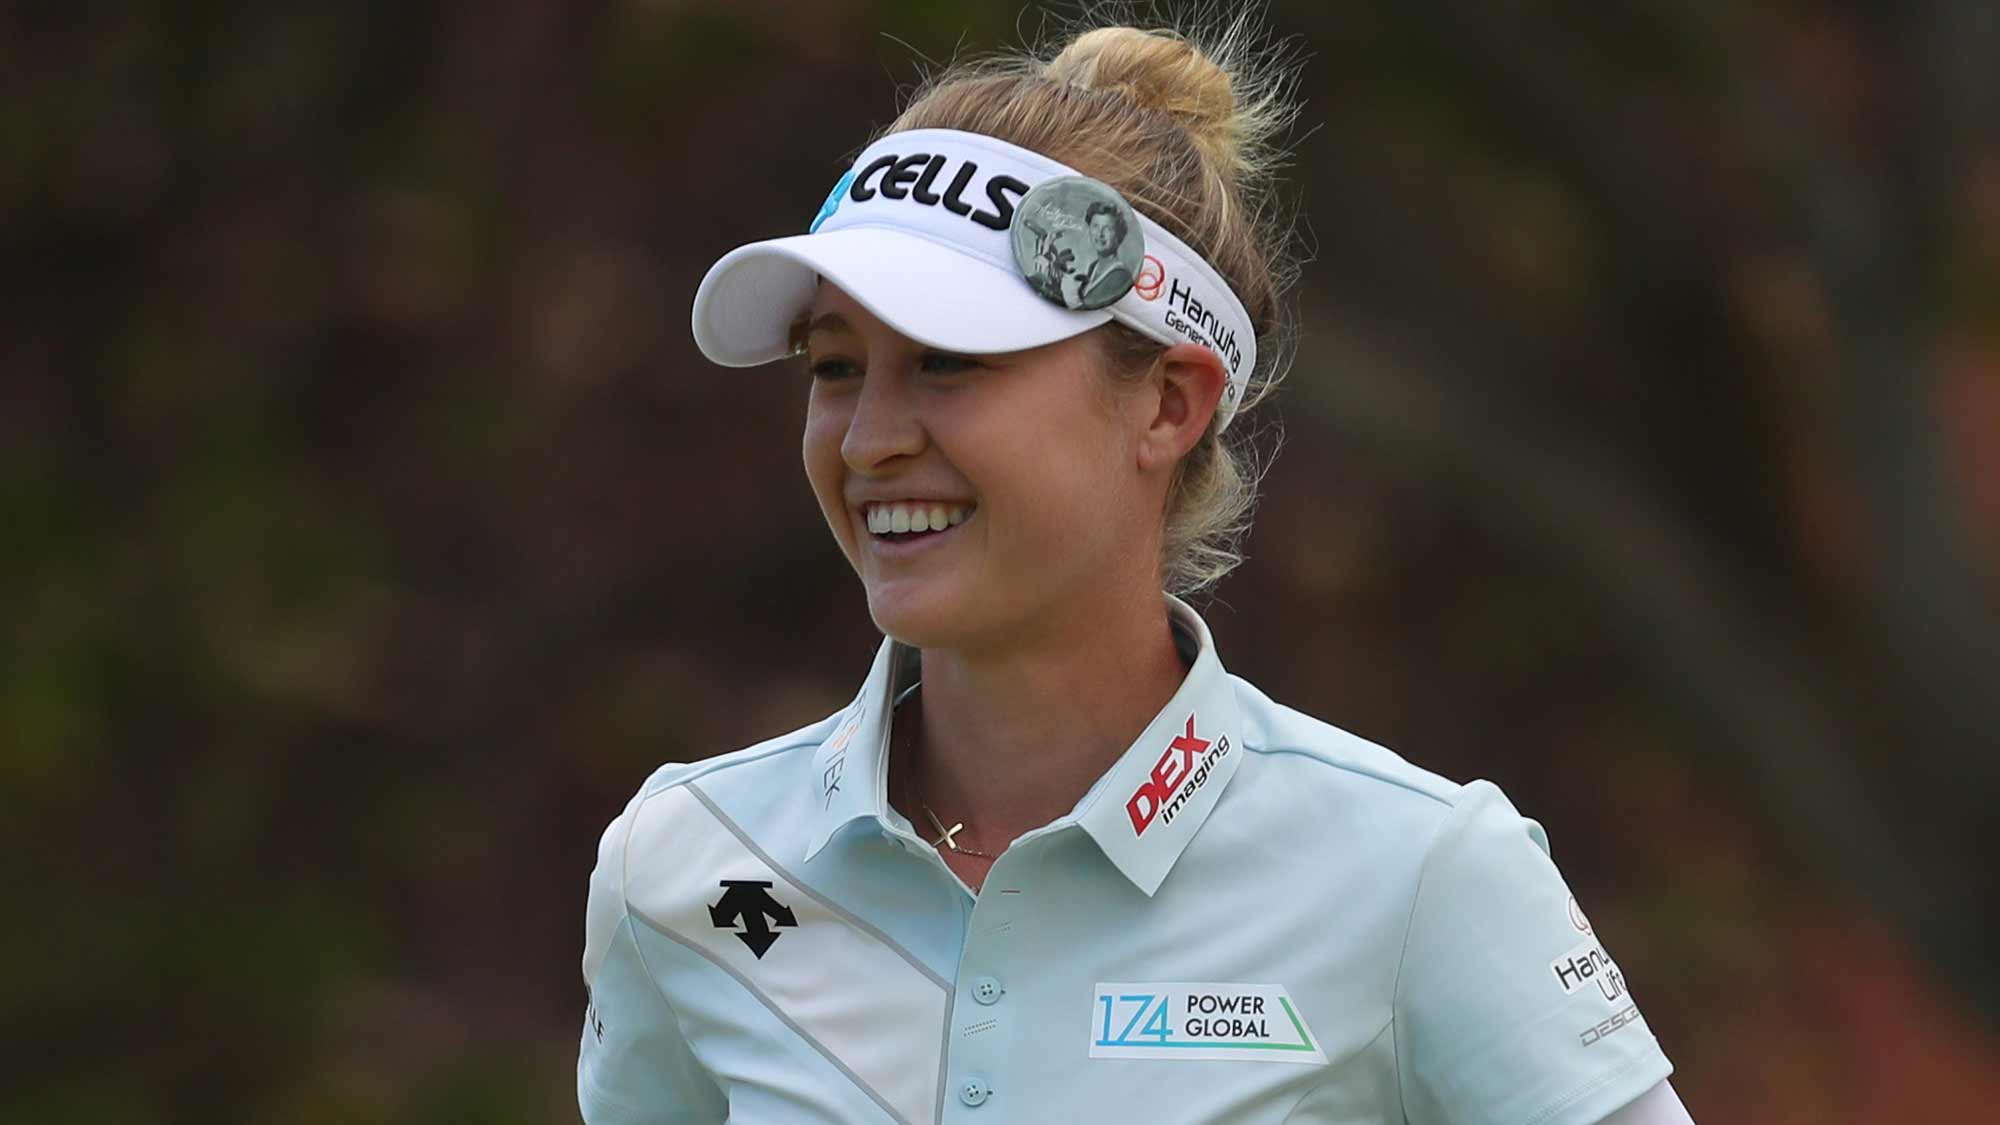 Nelly Korda smiles after finishing her second round of the LOTTE Championship on April 19, 2019 in Kapolei, Hawaii